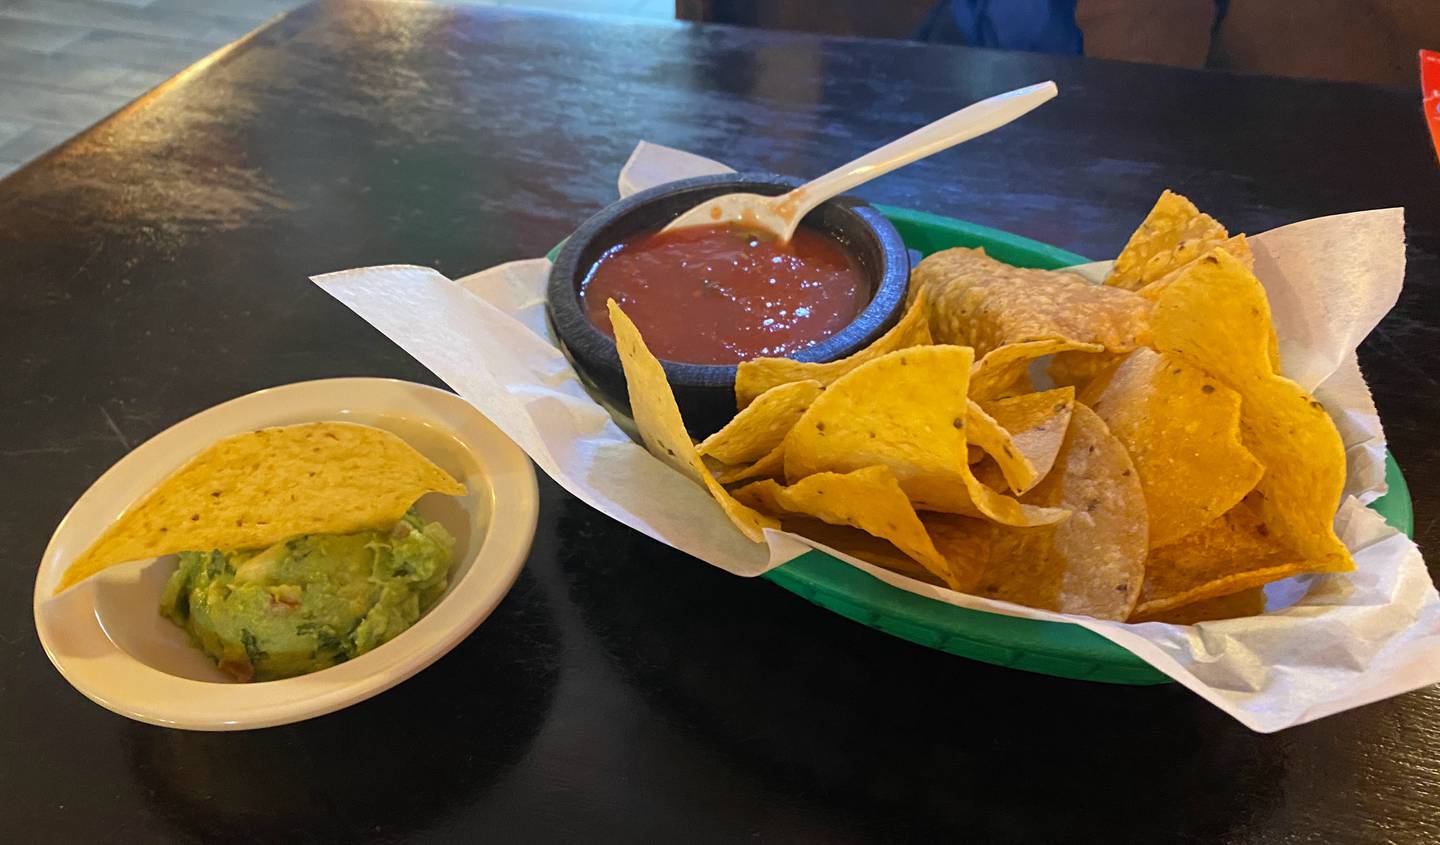 No trip to a Mexican restaurant is complete without an order of chips, guacamole and salsa ($8.99).